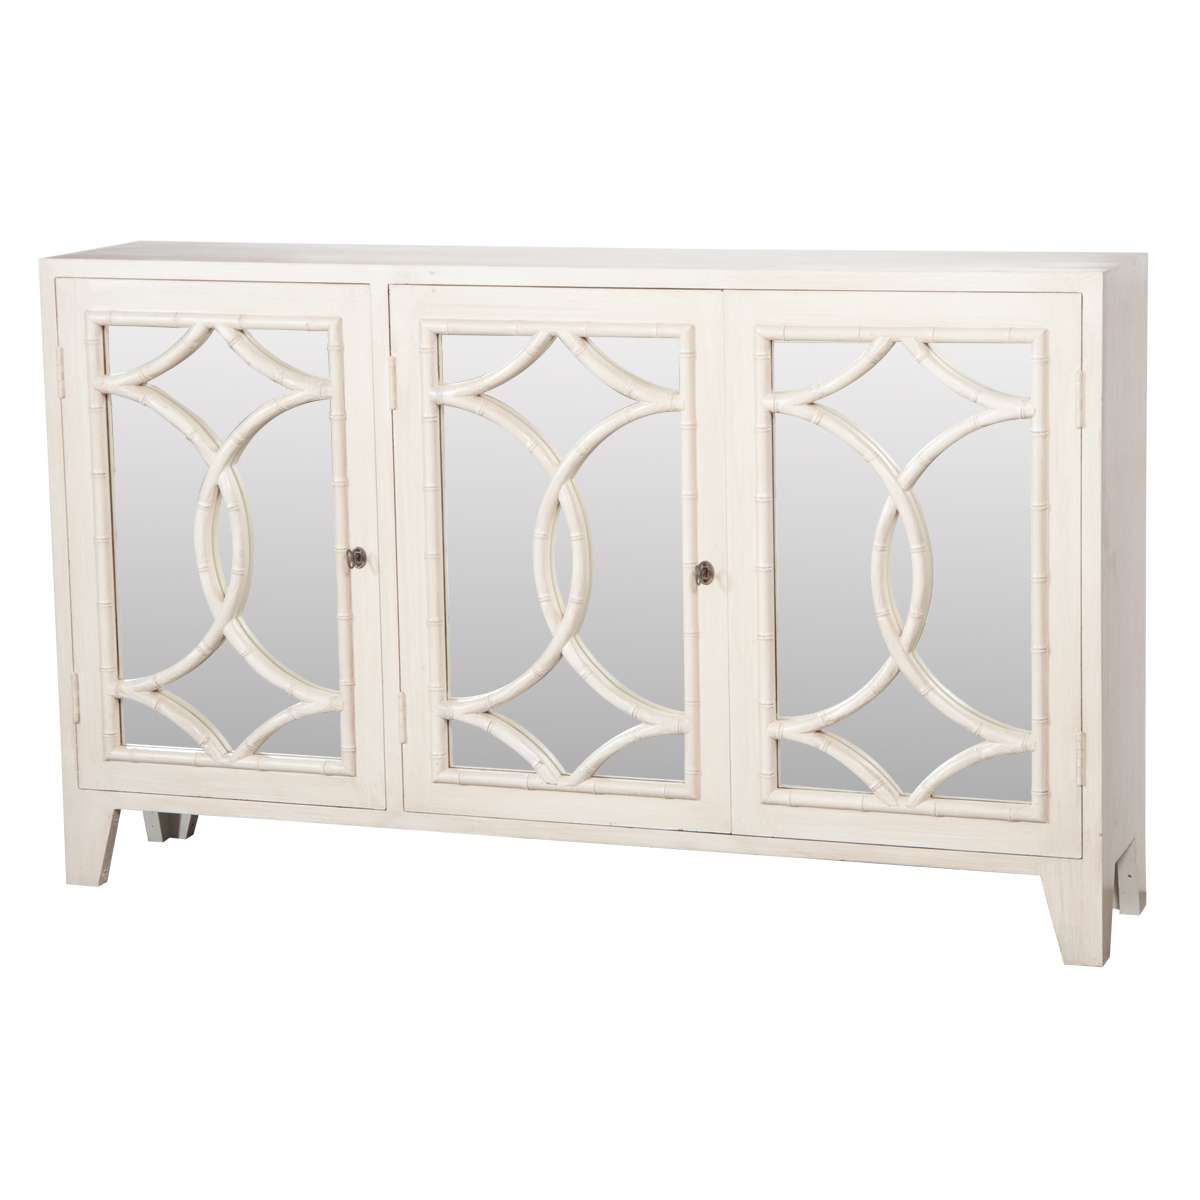 White Wash Mirrored Credenza Intended For White Mirrored Sideboards (View 10 of 20)